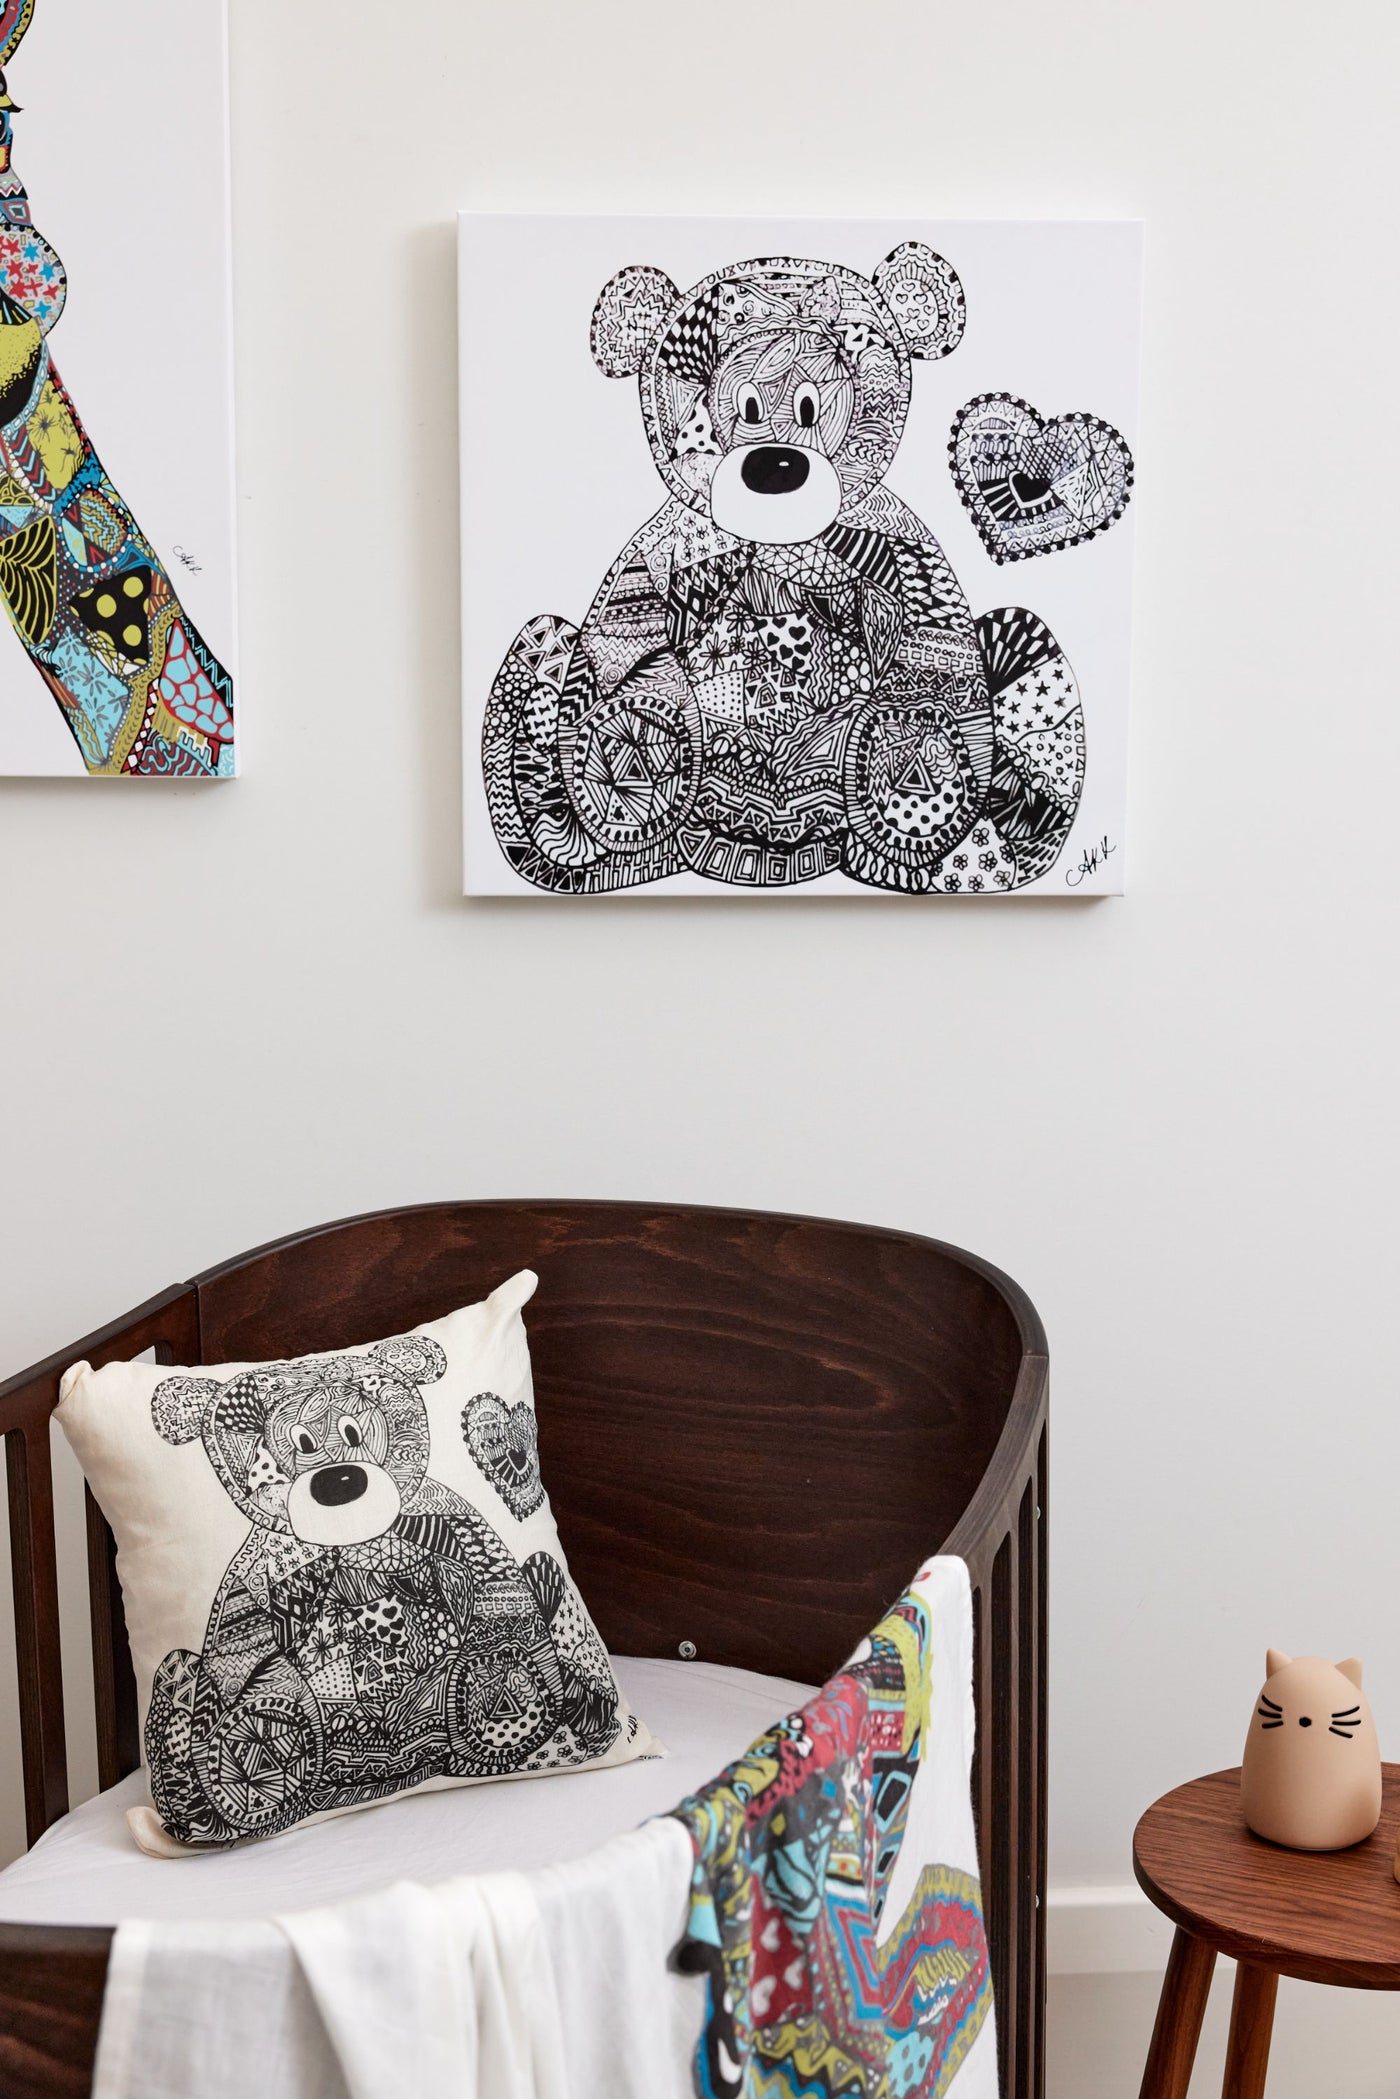 Tallulah the Teddy Natural Linen Cushion - Black and White